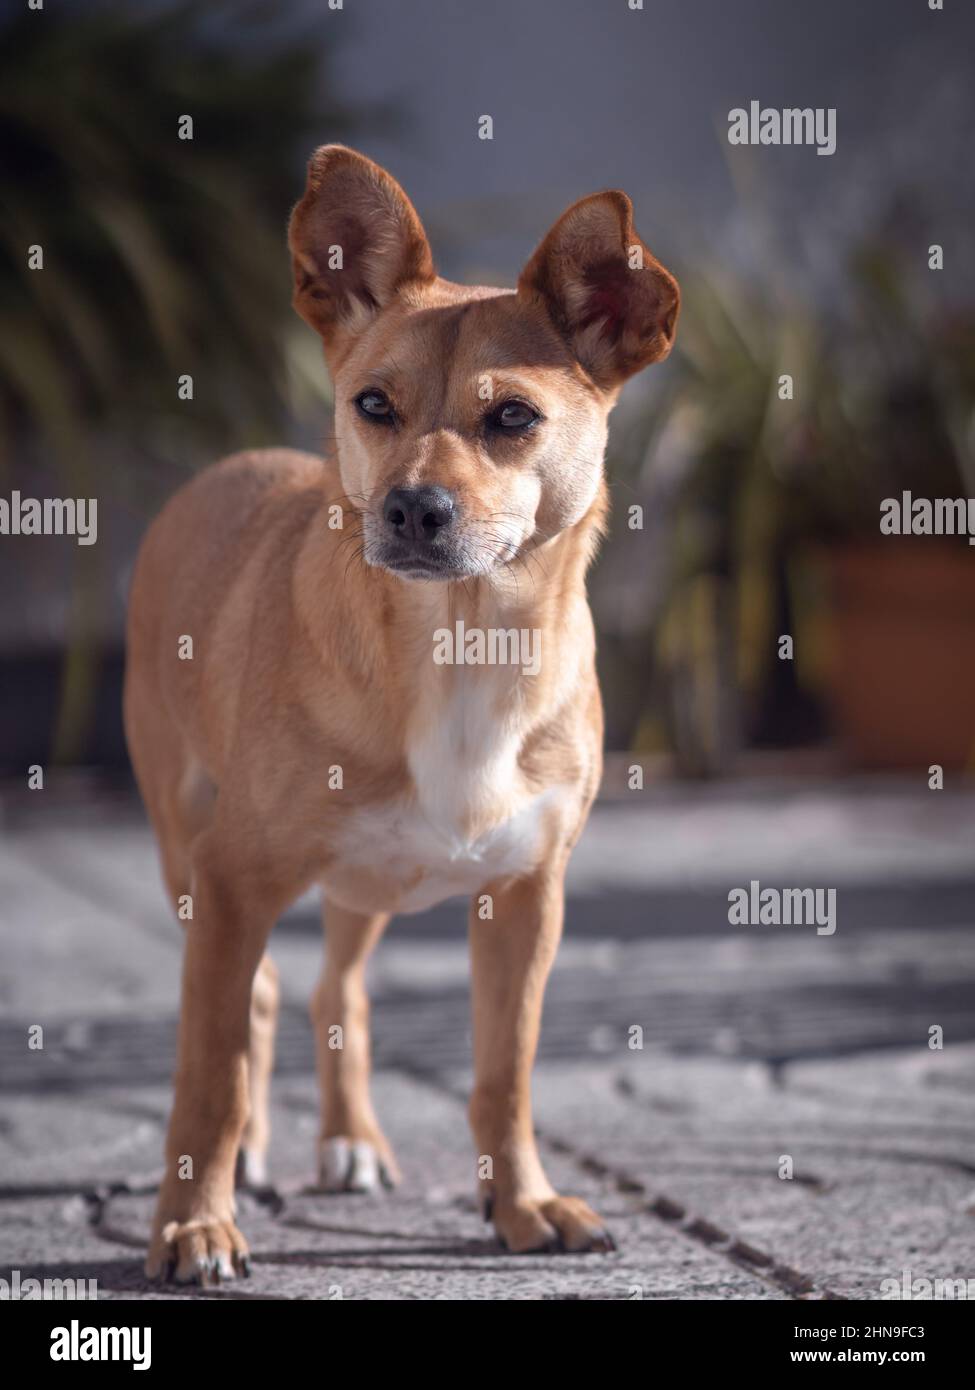 A beautiful mixed-breed dog with big ears standing in the backyard and looking away with a serene face expression illuminated by the sun Stock Photo